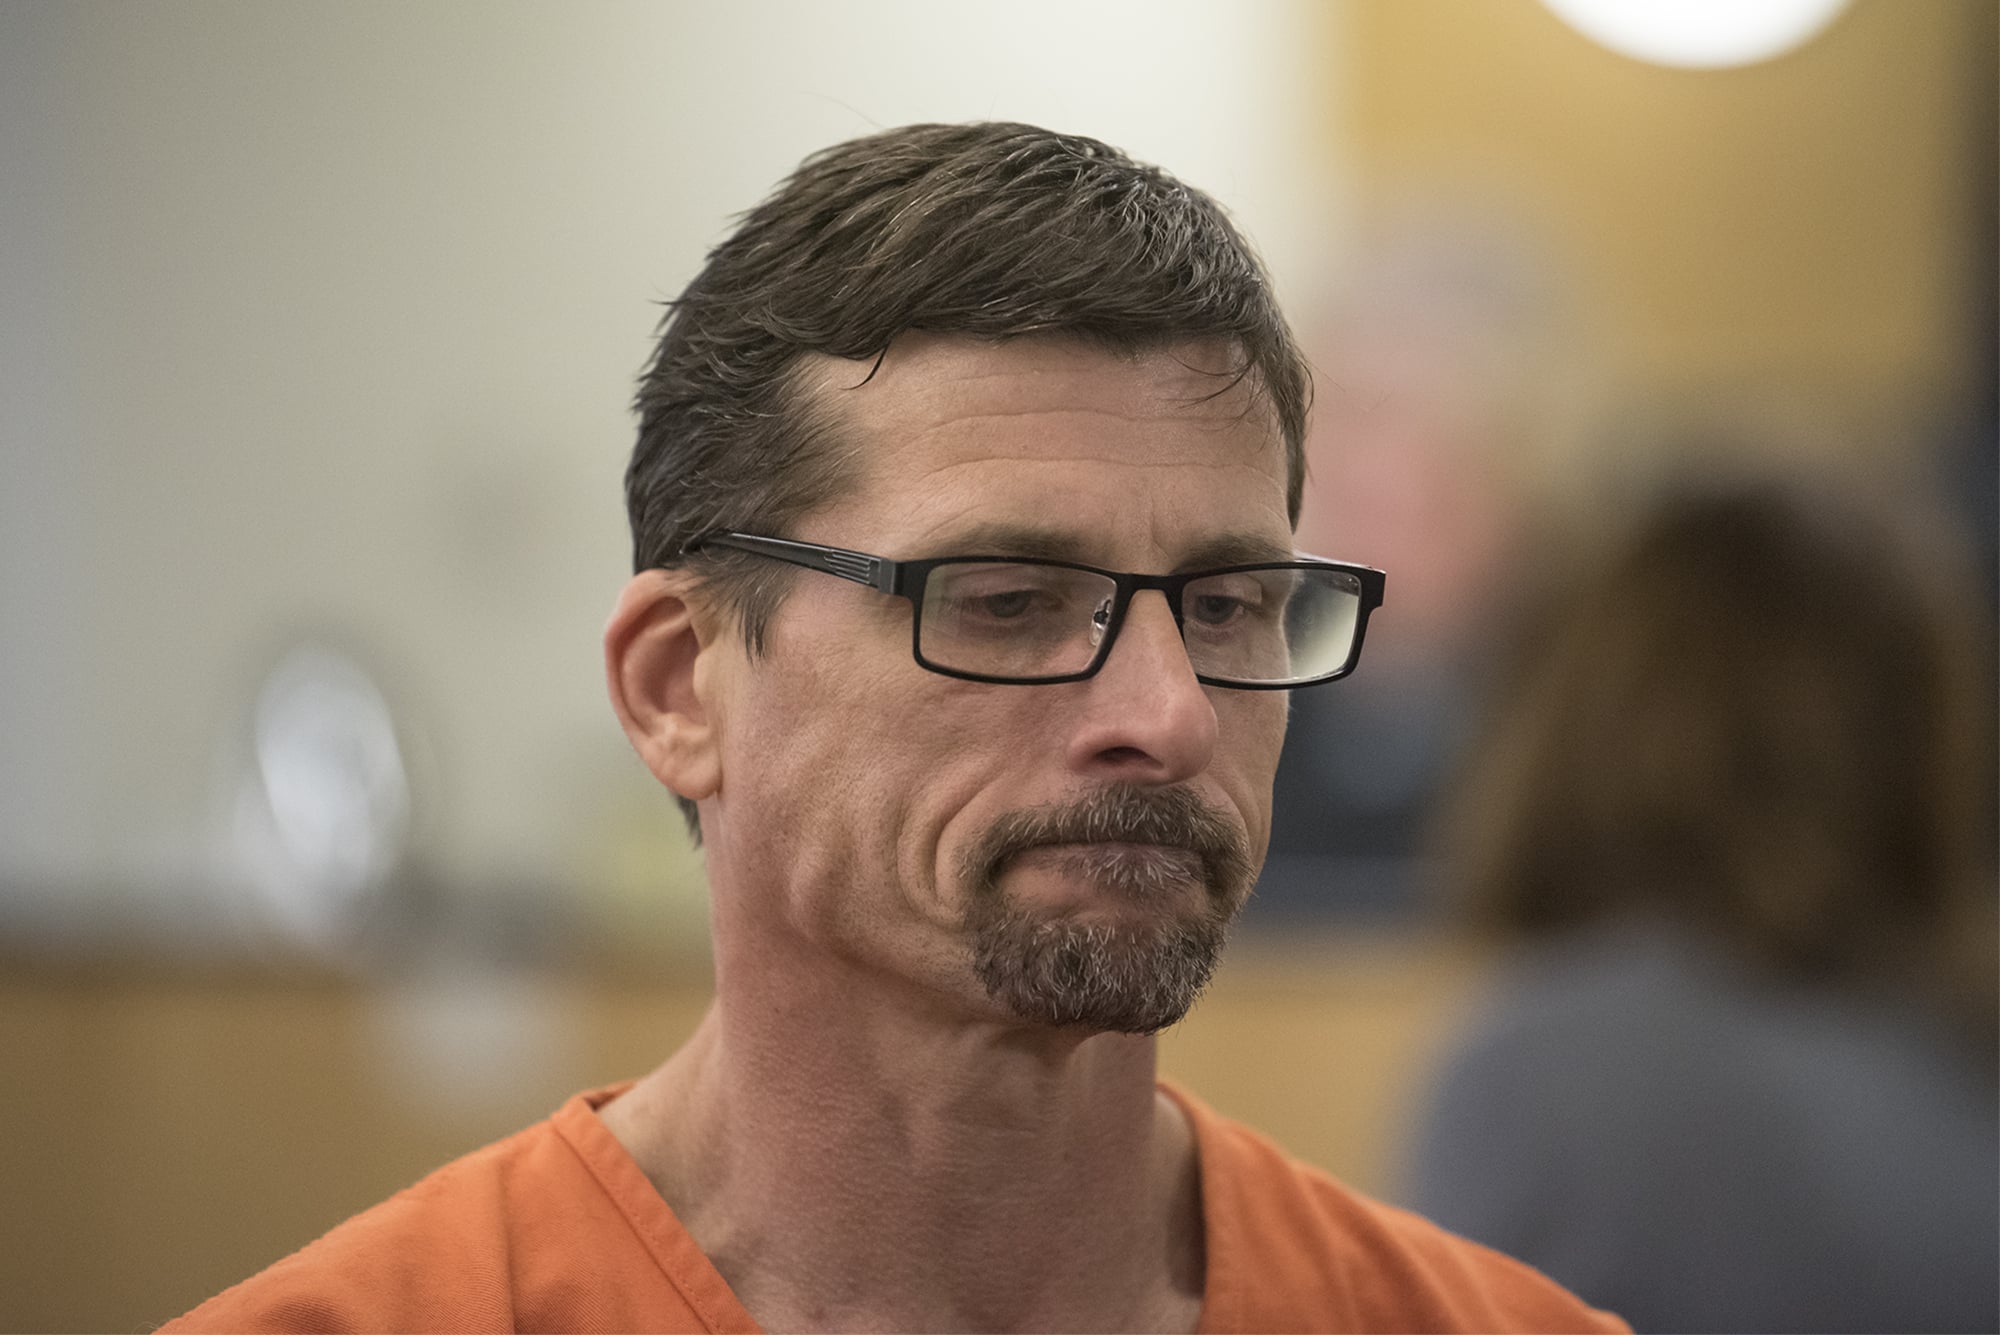 Eddie D. Anzalone, 47, of Battle Ground makes a first appearance March 26, 2019, in Clark County Superior Court on suspicion of second-degree rape and indecent liberties. Anzalone, a licensed massage therapist, is accused of inappropriately touching two female clients.